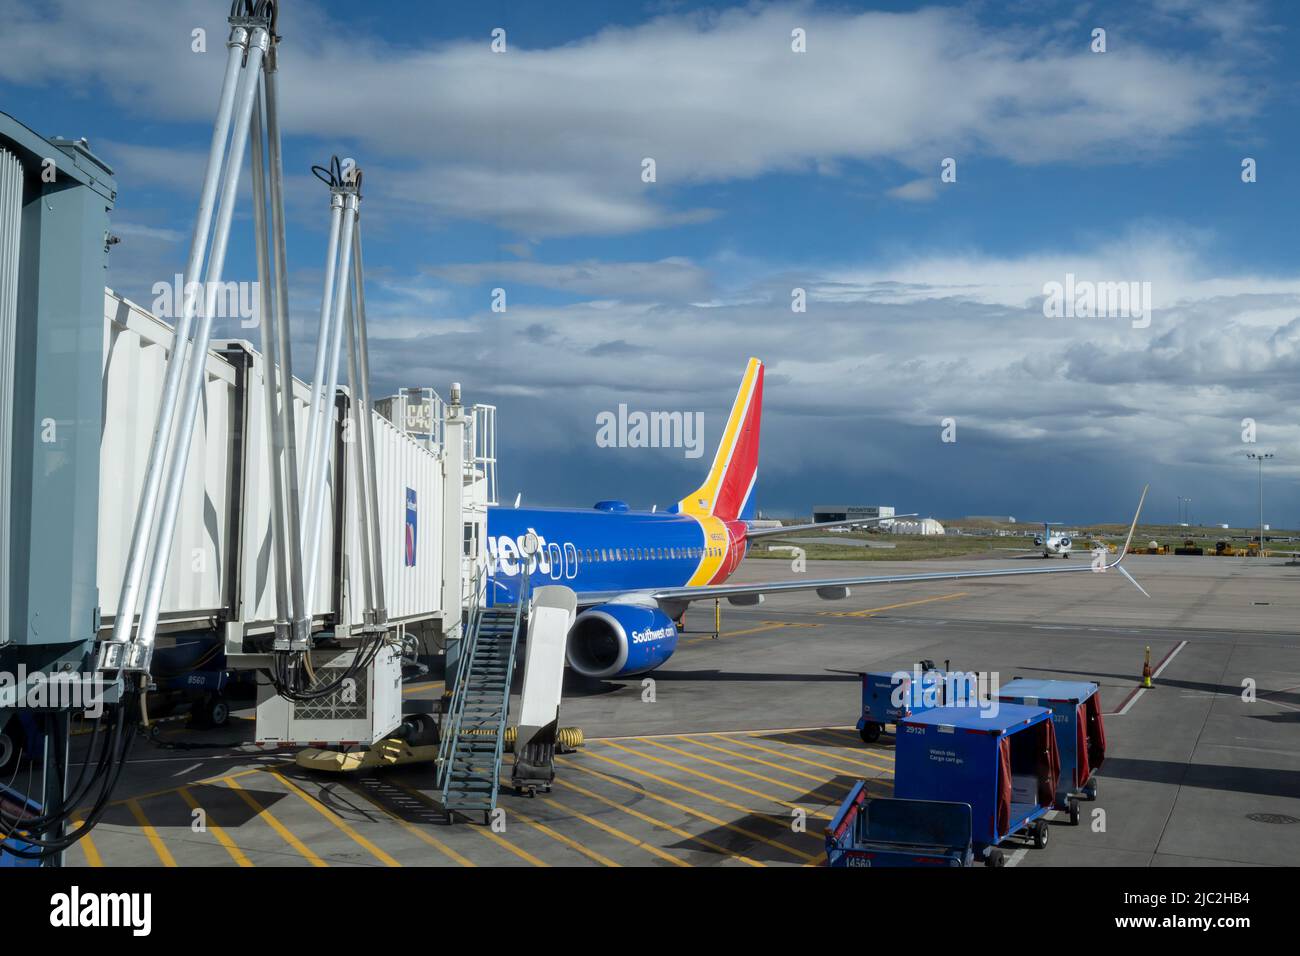 Denver, Colorado, May 30, 2022. Southwest airplane ready for boarding, viewed from the glass window of the Denver International airport Stock Photo